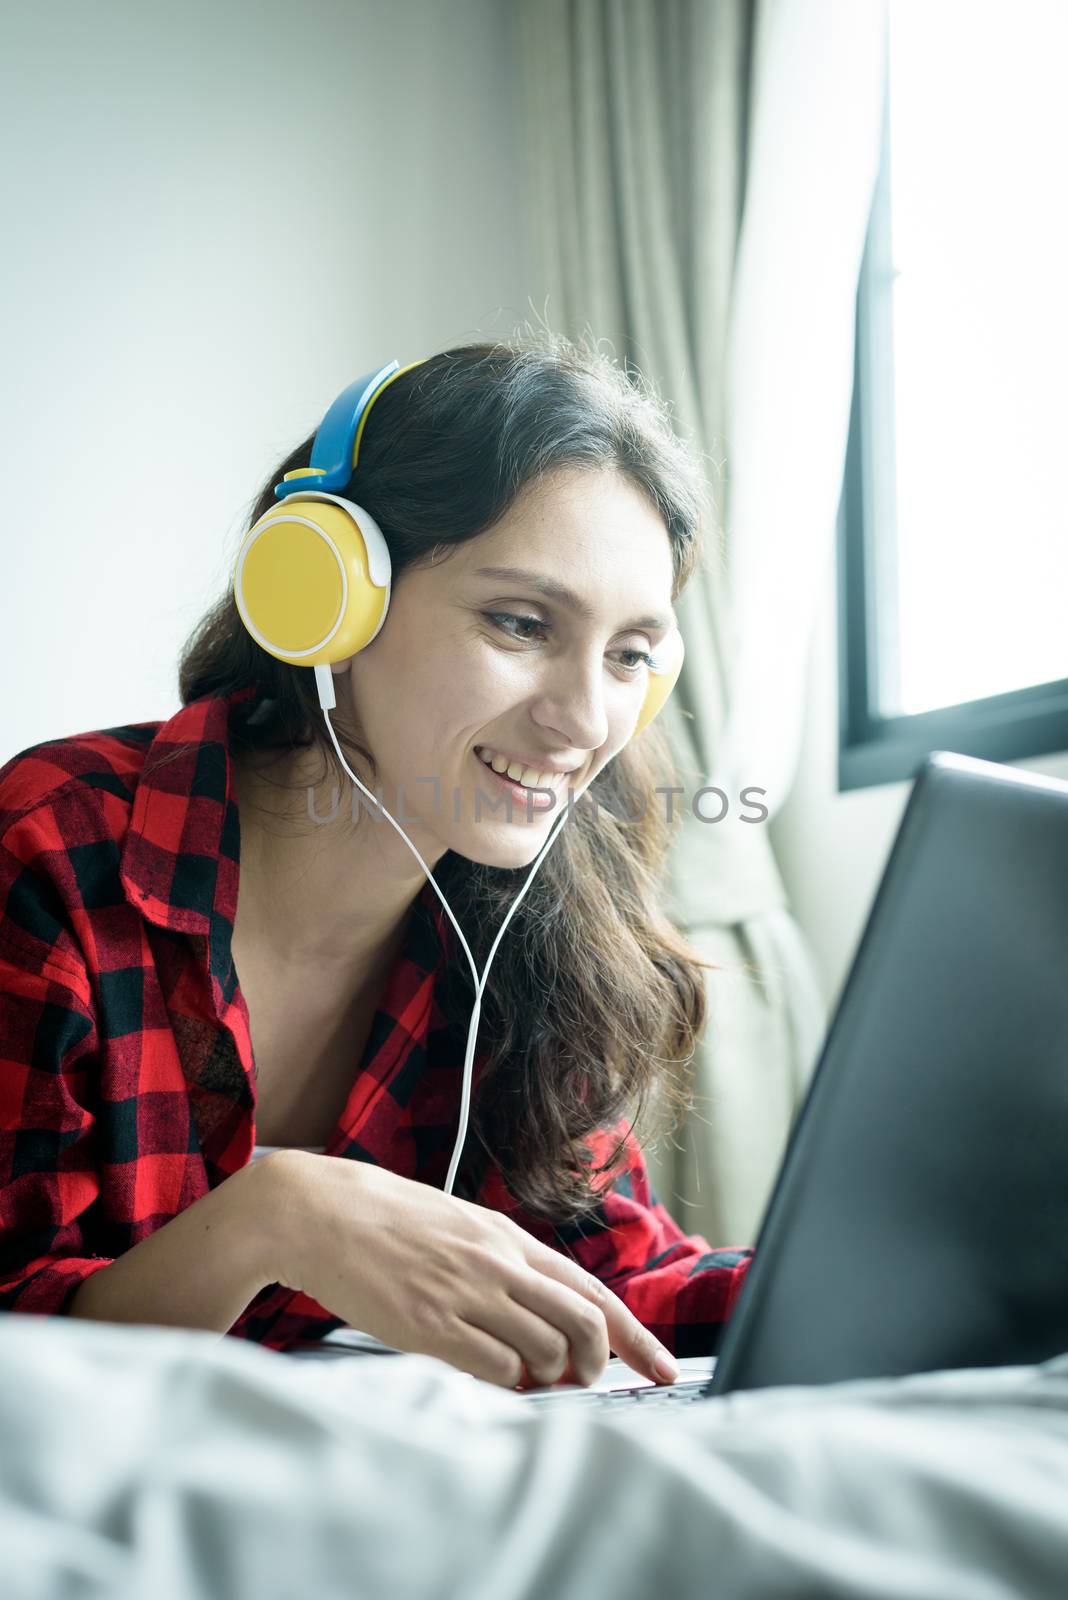 Beautiful woman working and listening to music on a laptop with yellow headphone and lying down on the bed at a condominium in the morning.